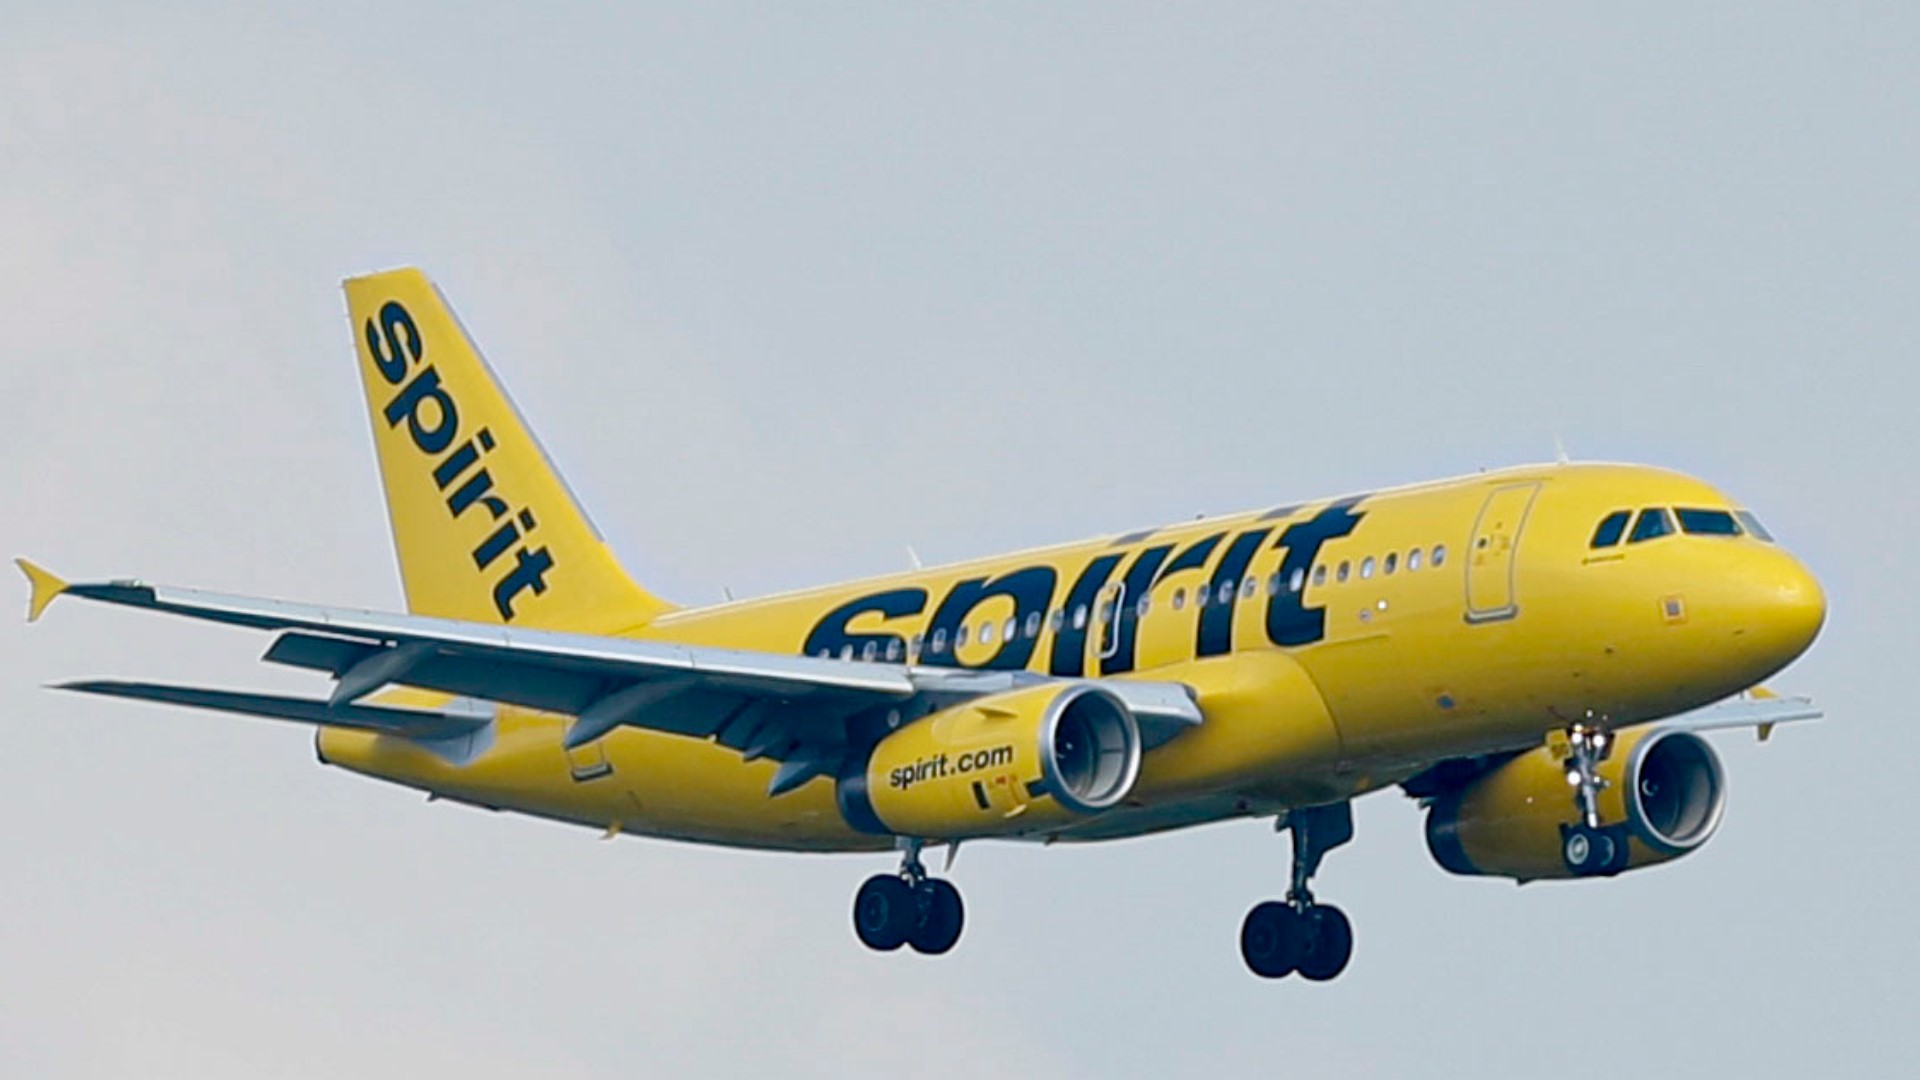 More than 40% of Spirit's flights on Thursday have been delayed, according to the flight tracking website FlightAware.